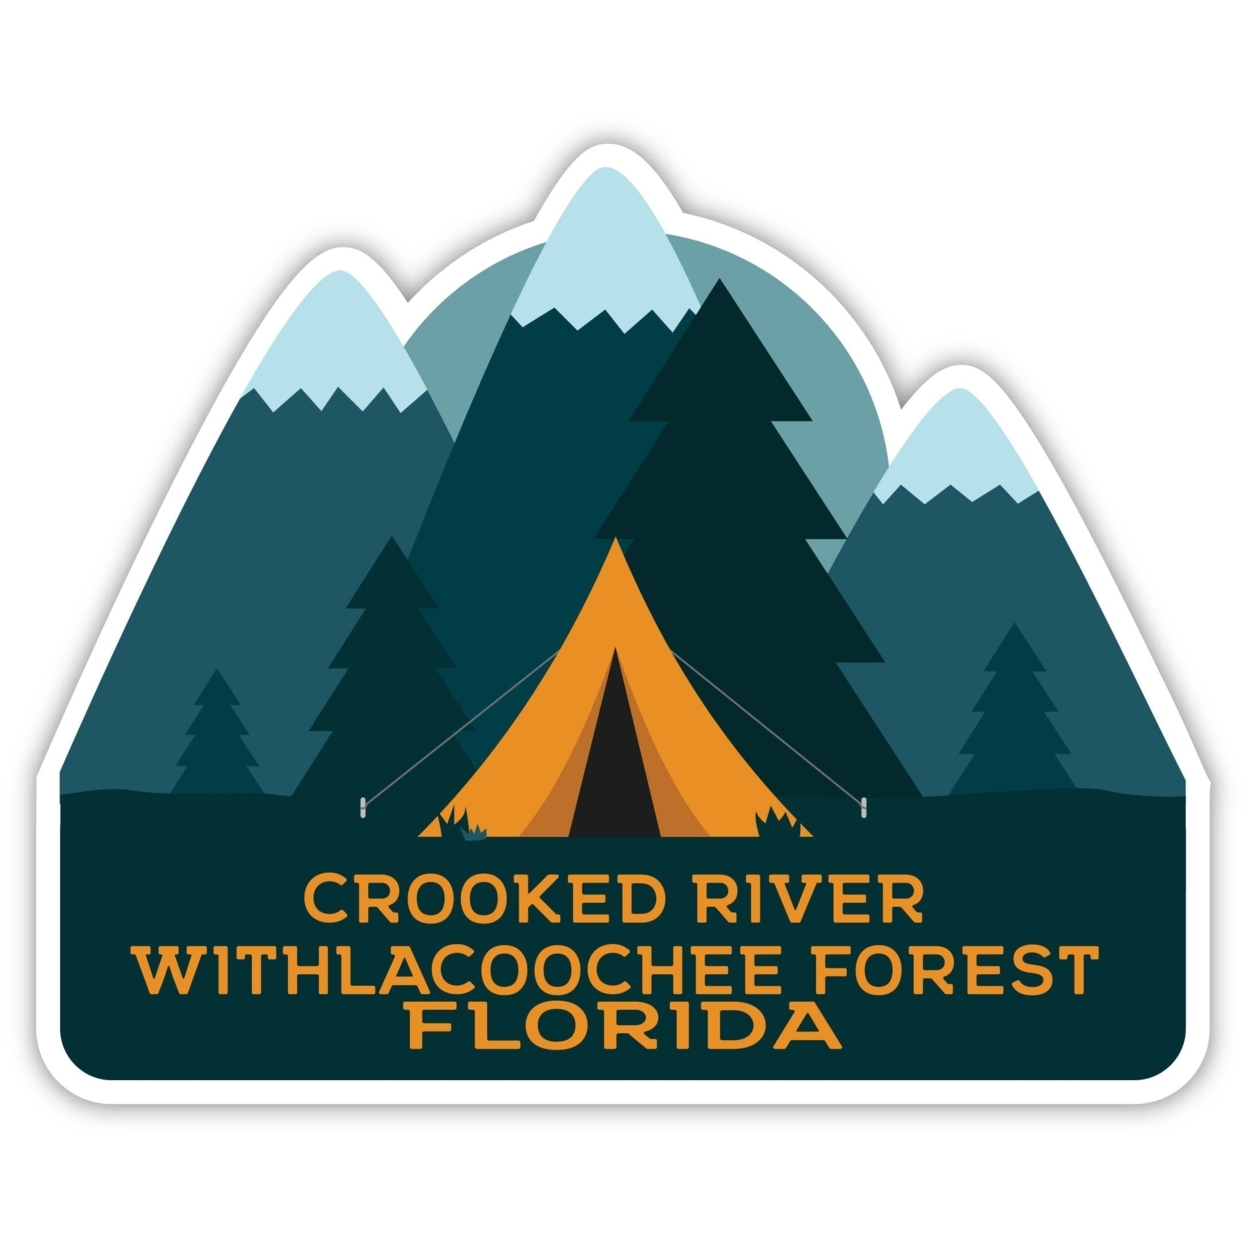 Crooked River Withlacoochee Forest Florida Souvenir Decorative Stickers (Choose Theme And Size) - 4-Pack, 10-Inch, Tent